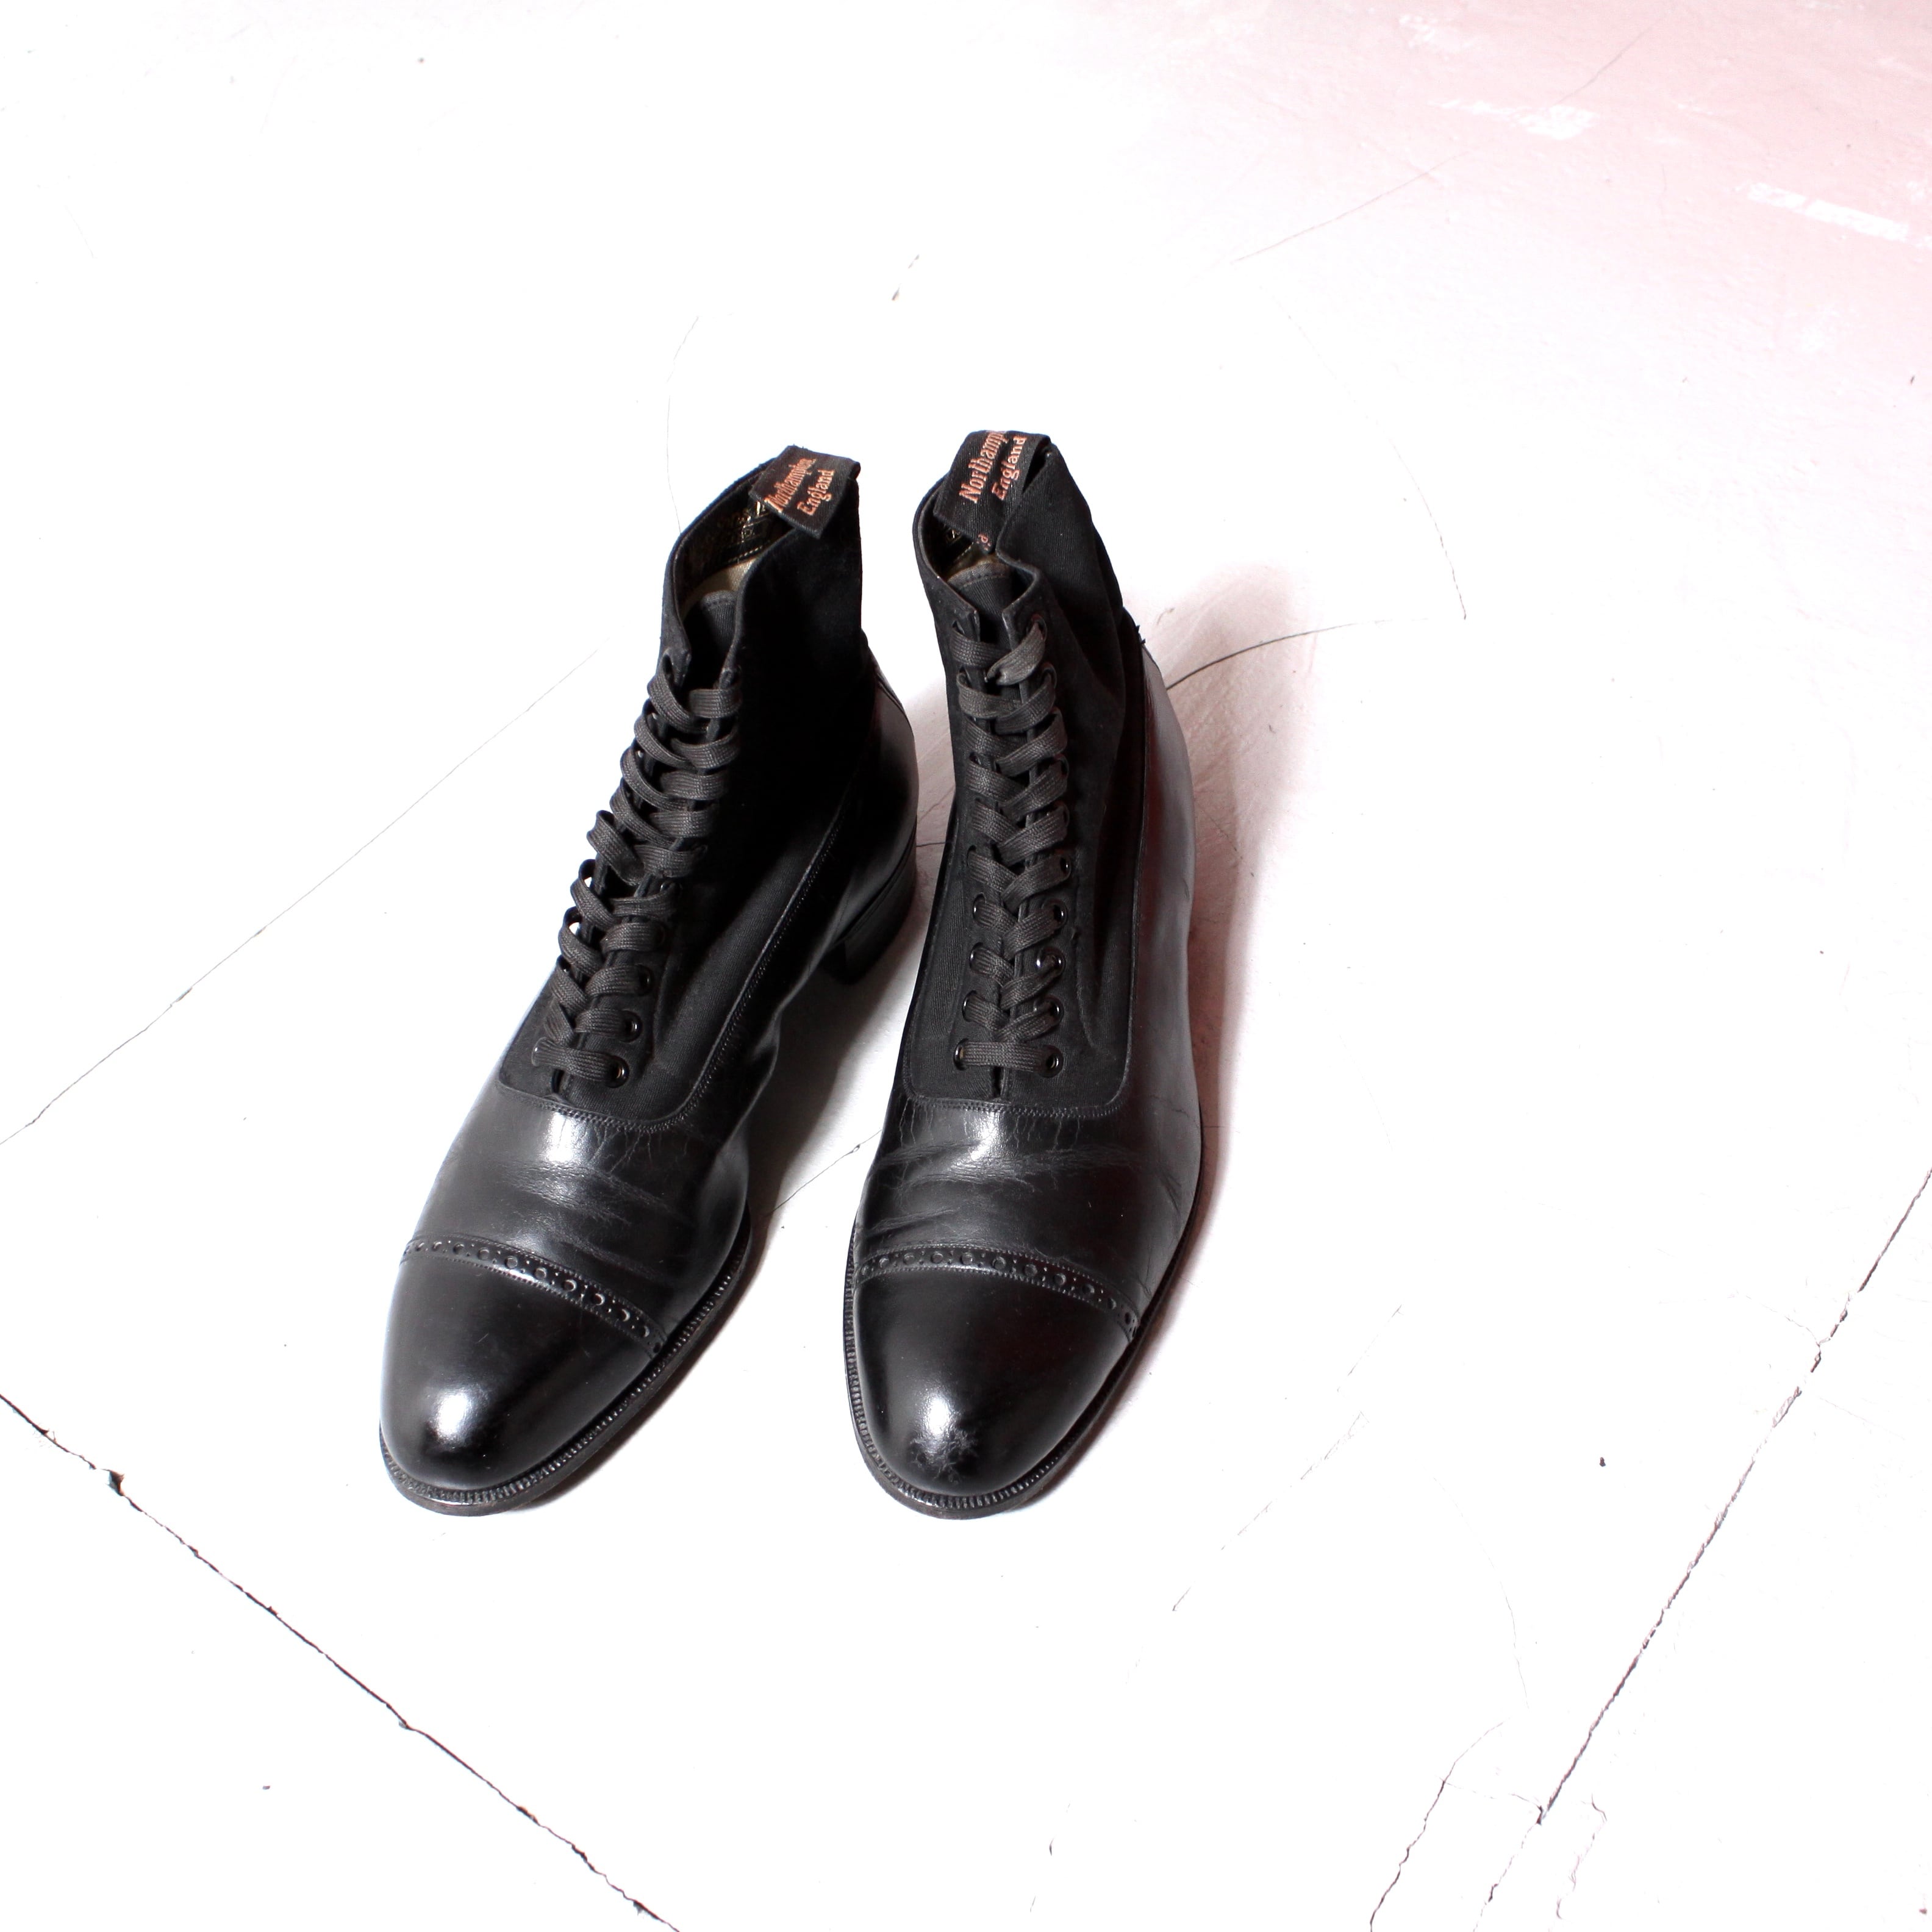 0576. 1900's Manfield & Sons Leather boots with melton spats